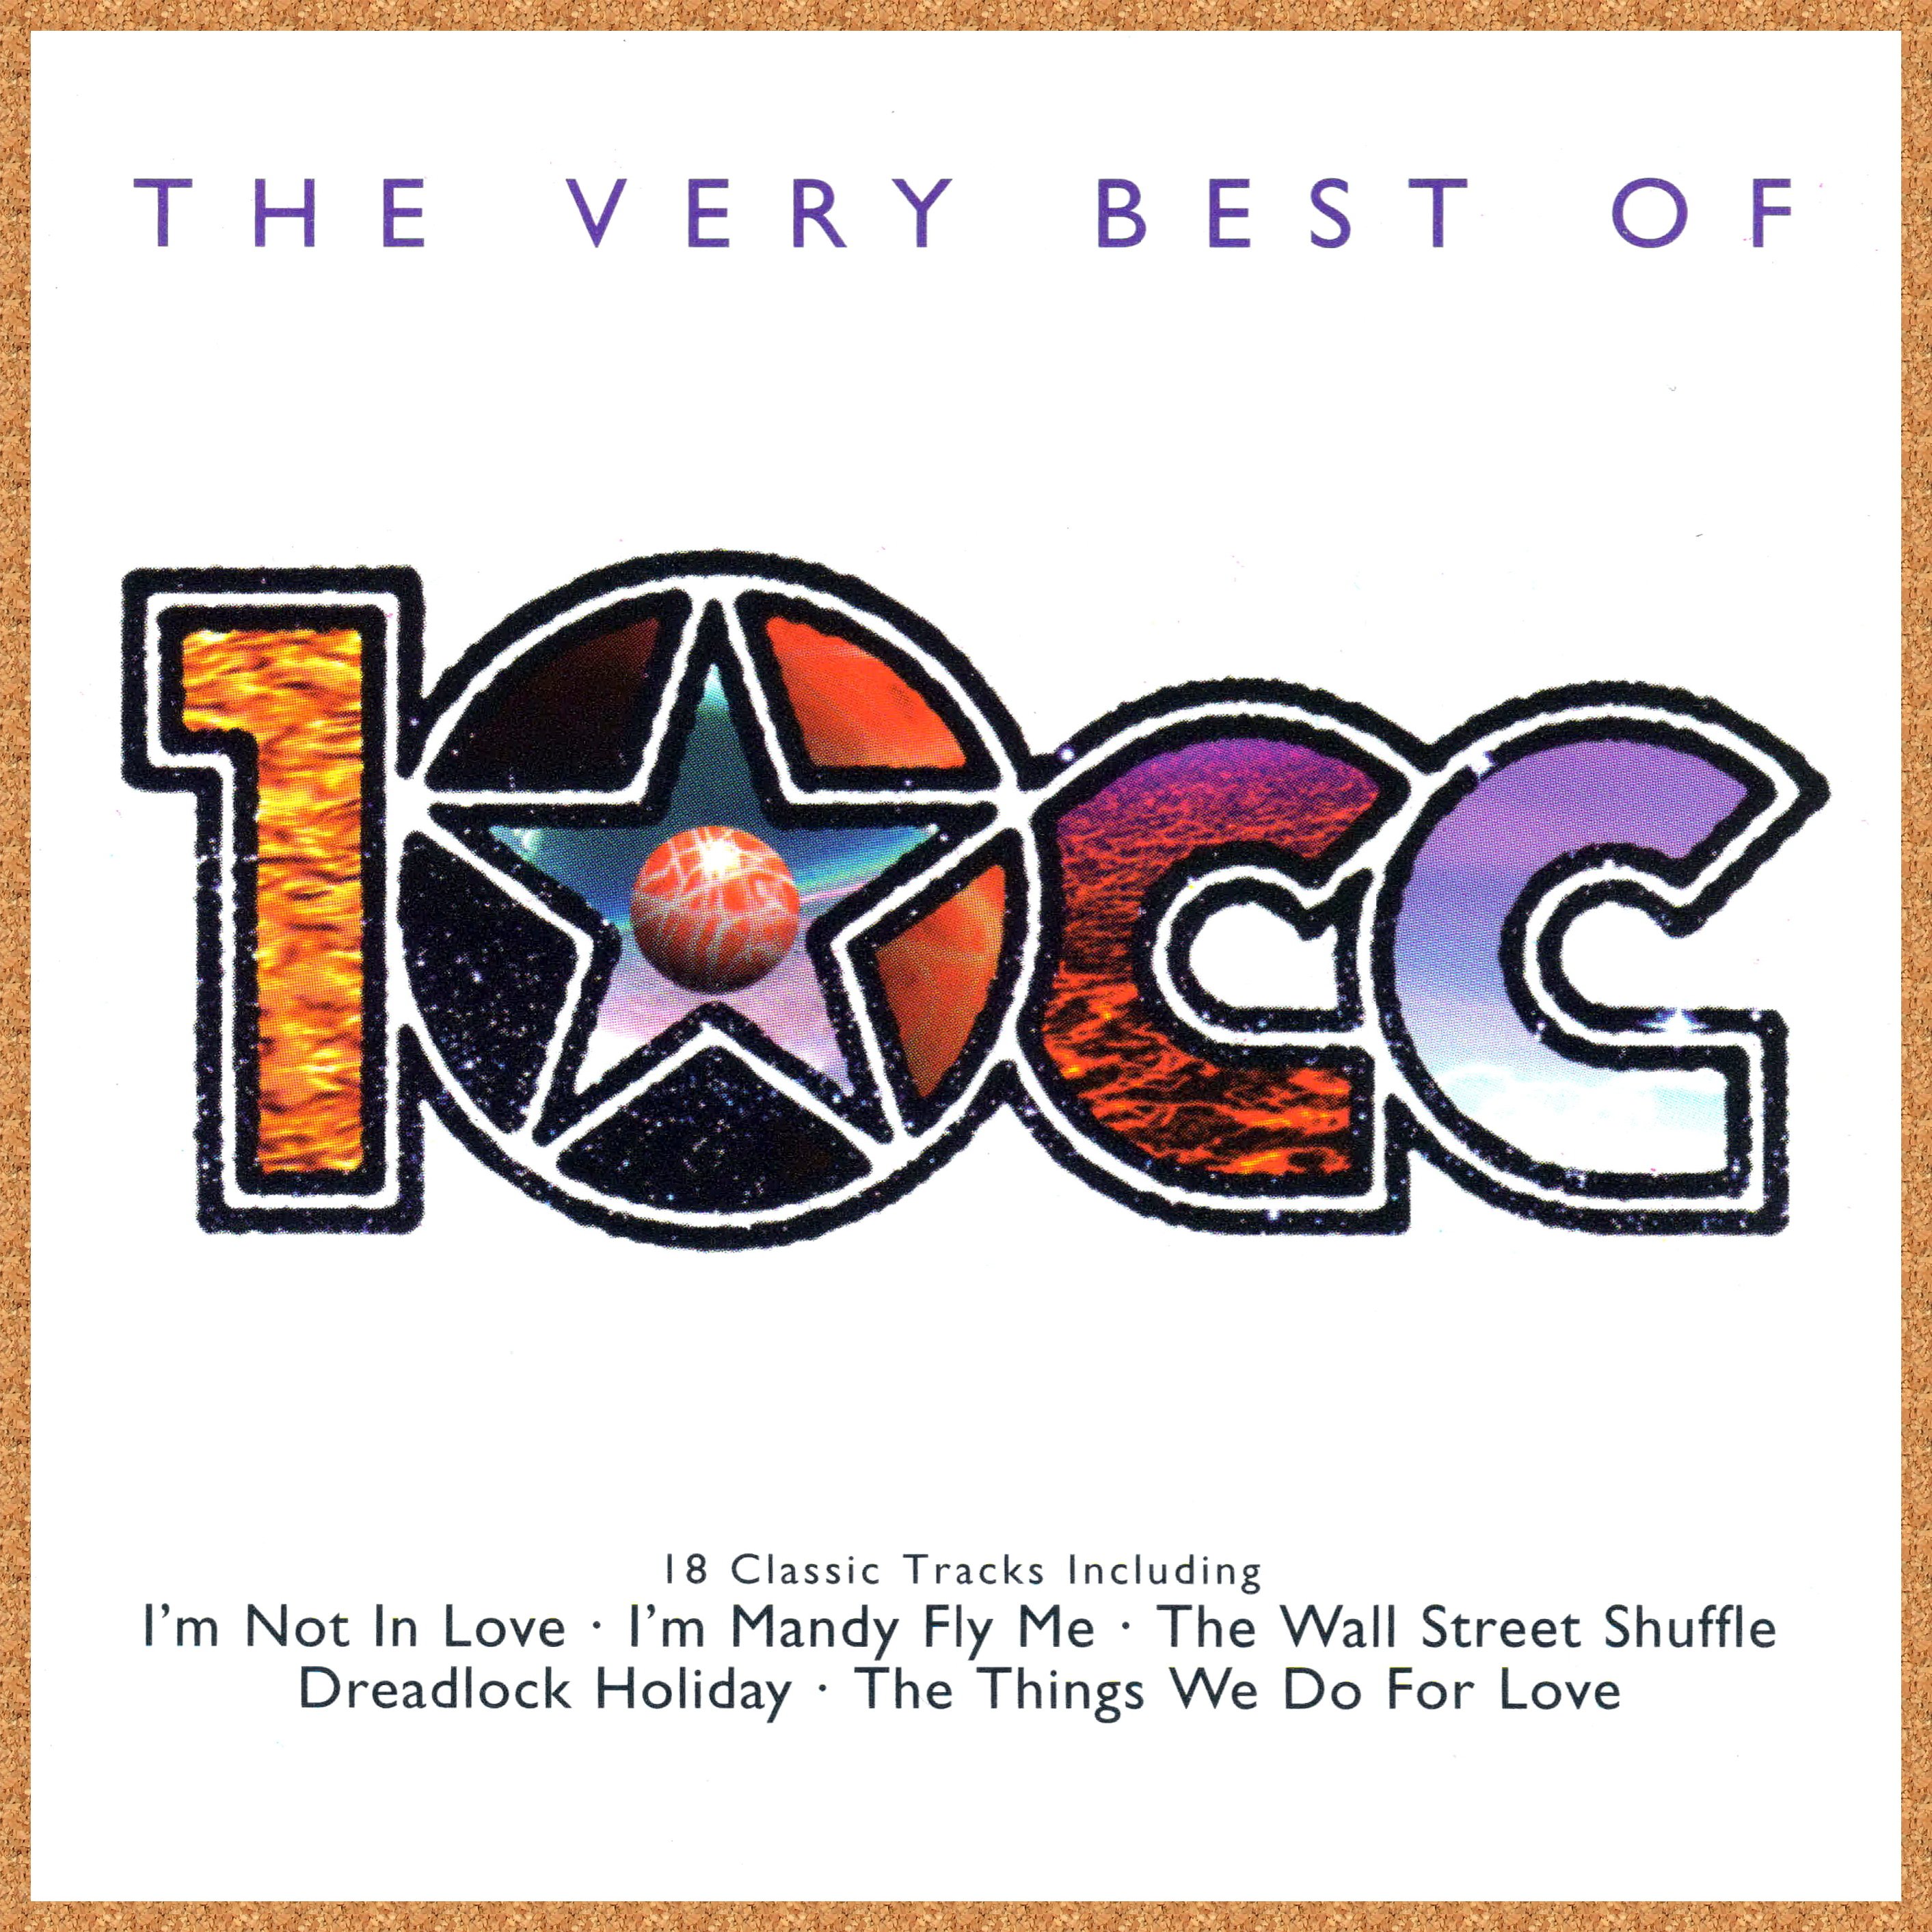 10cc-The Very Best Of 10cc-CD-FLAC-1997-FRAY Download